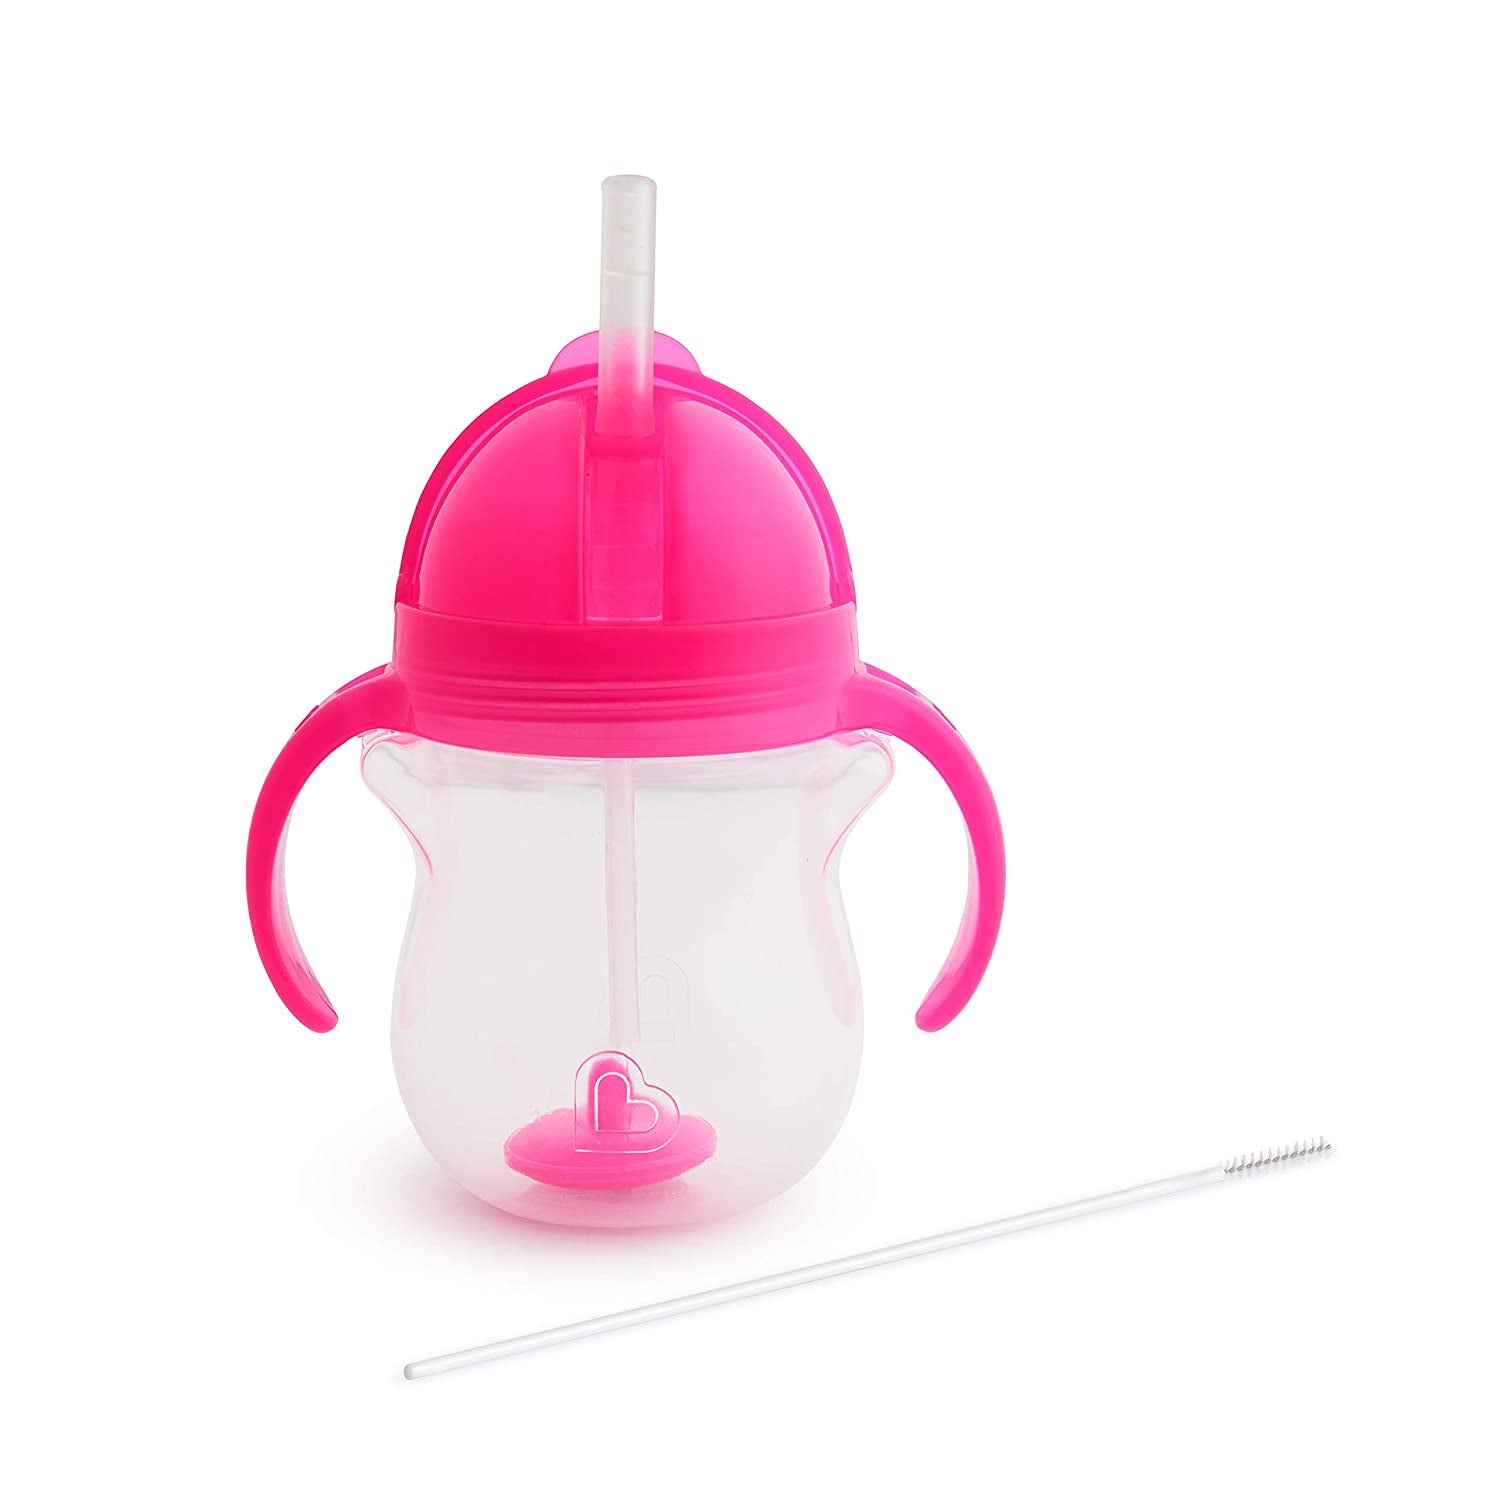 Munchkin Gentle Transition Sippy Cup with Trainer Handles 10 Ounce